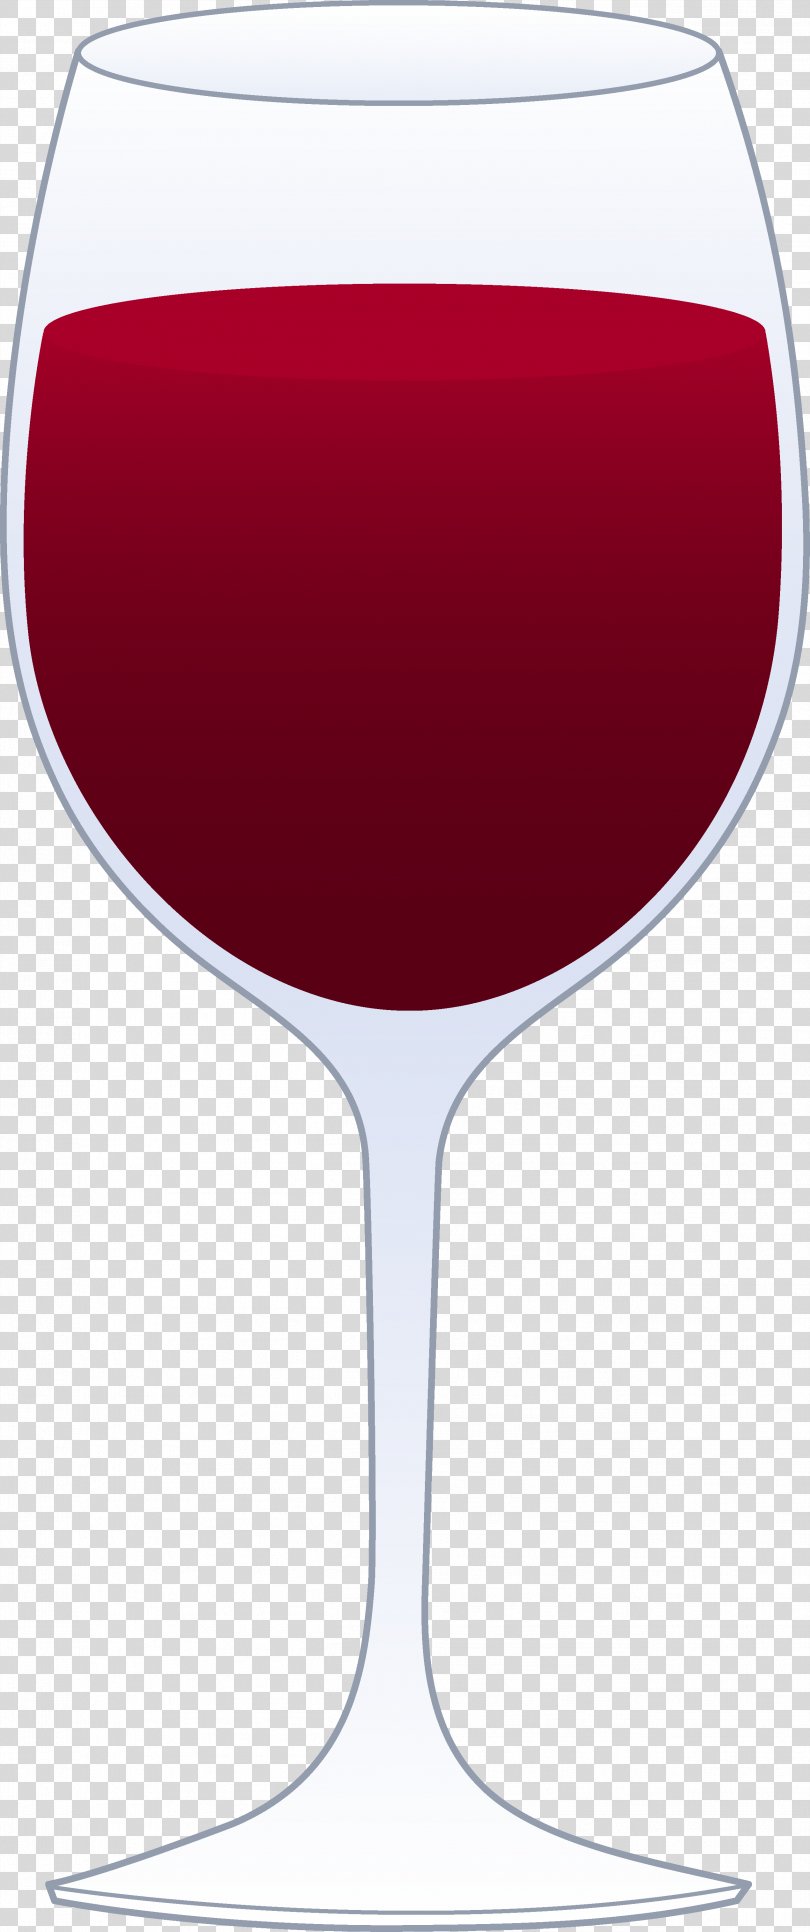 Red Wine White Wine Wine Glass Clip Art, Free Wine Pictures PNG